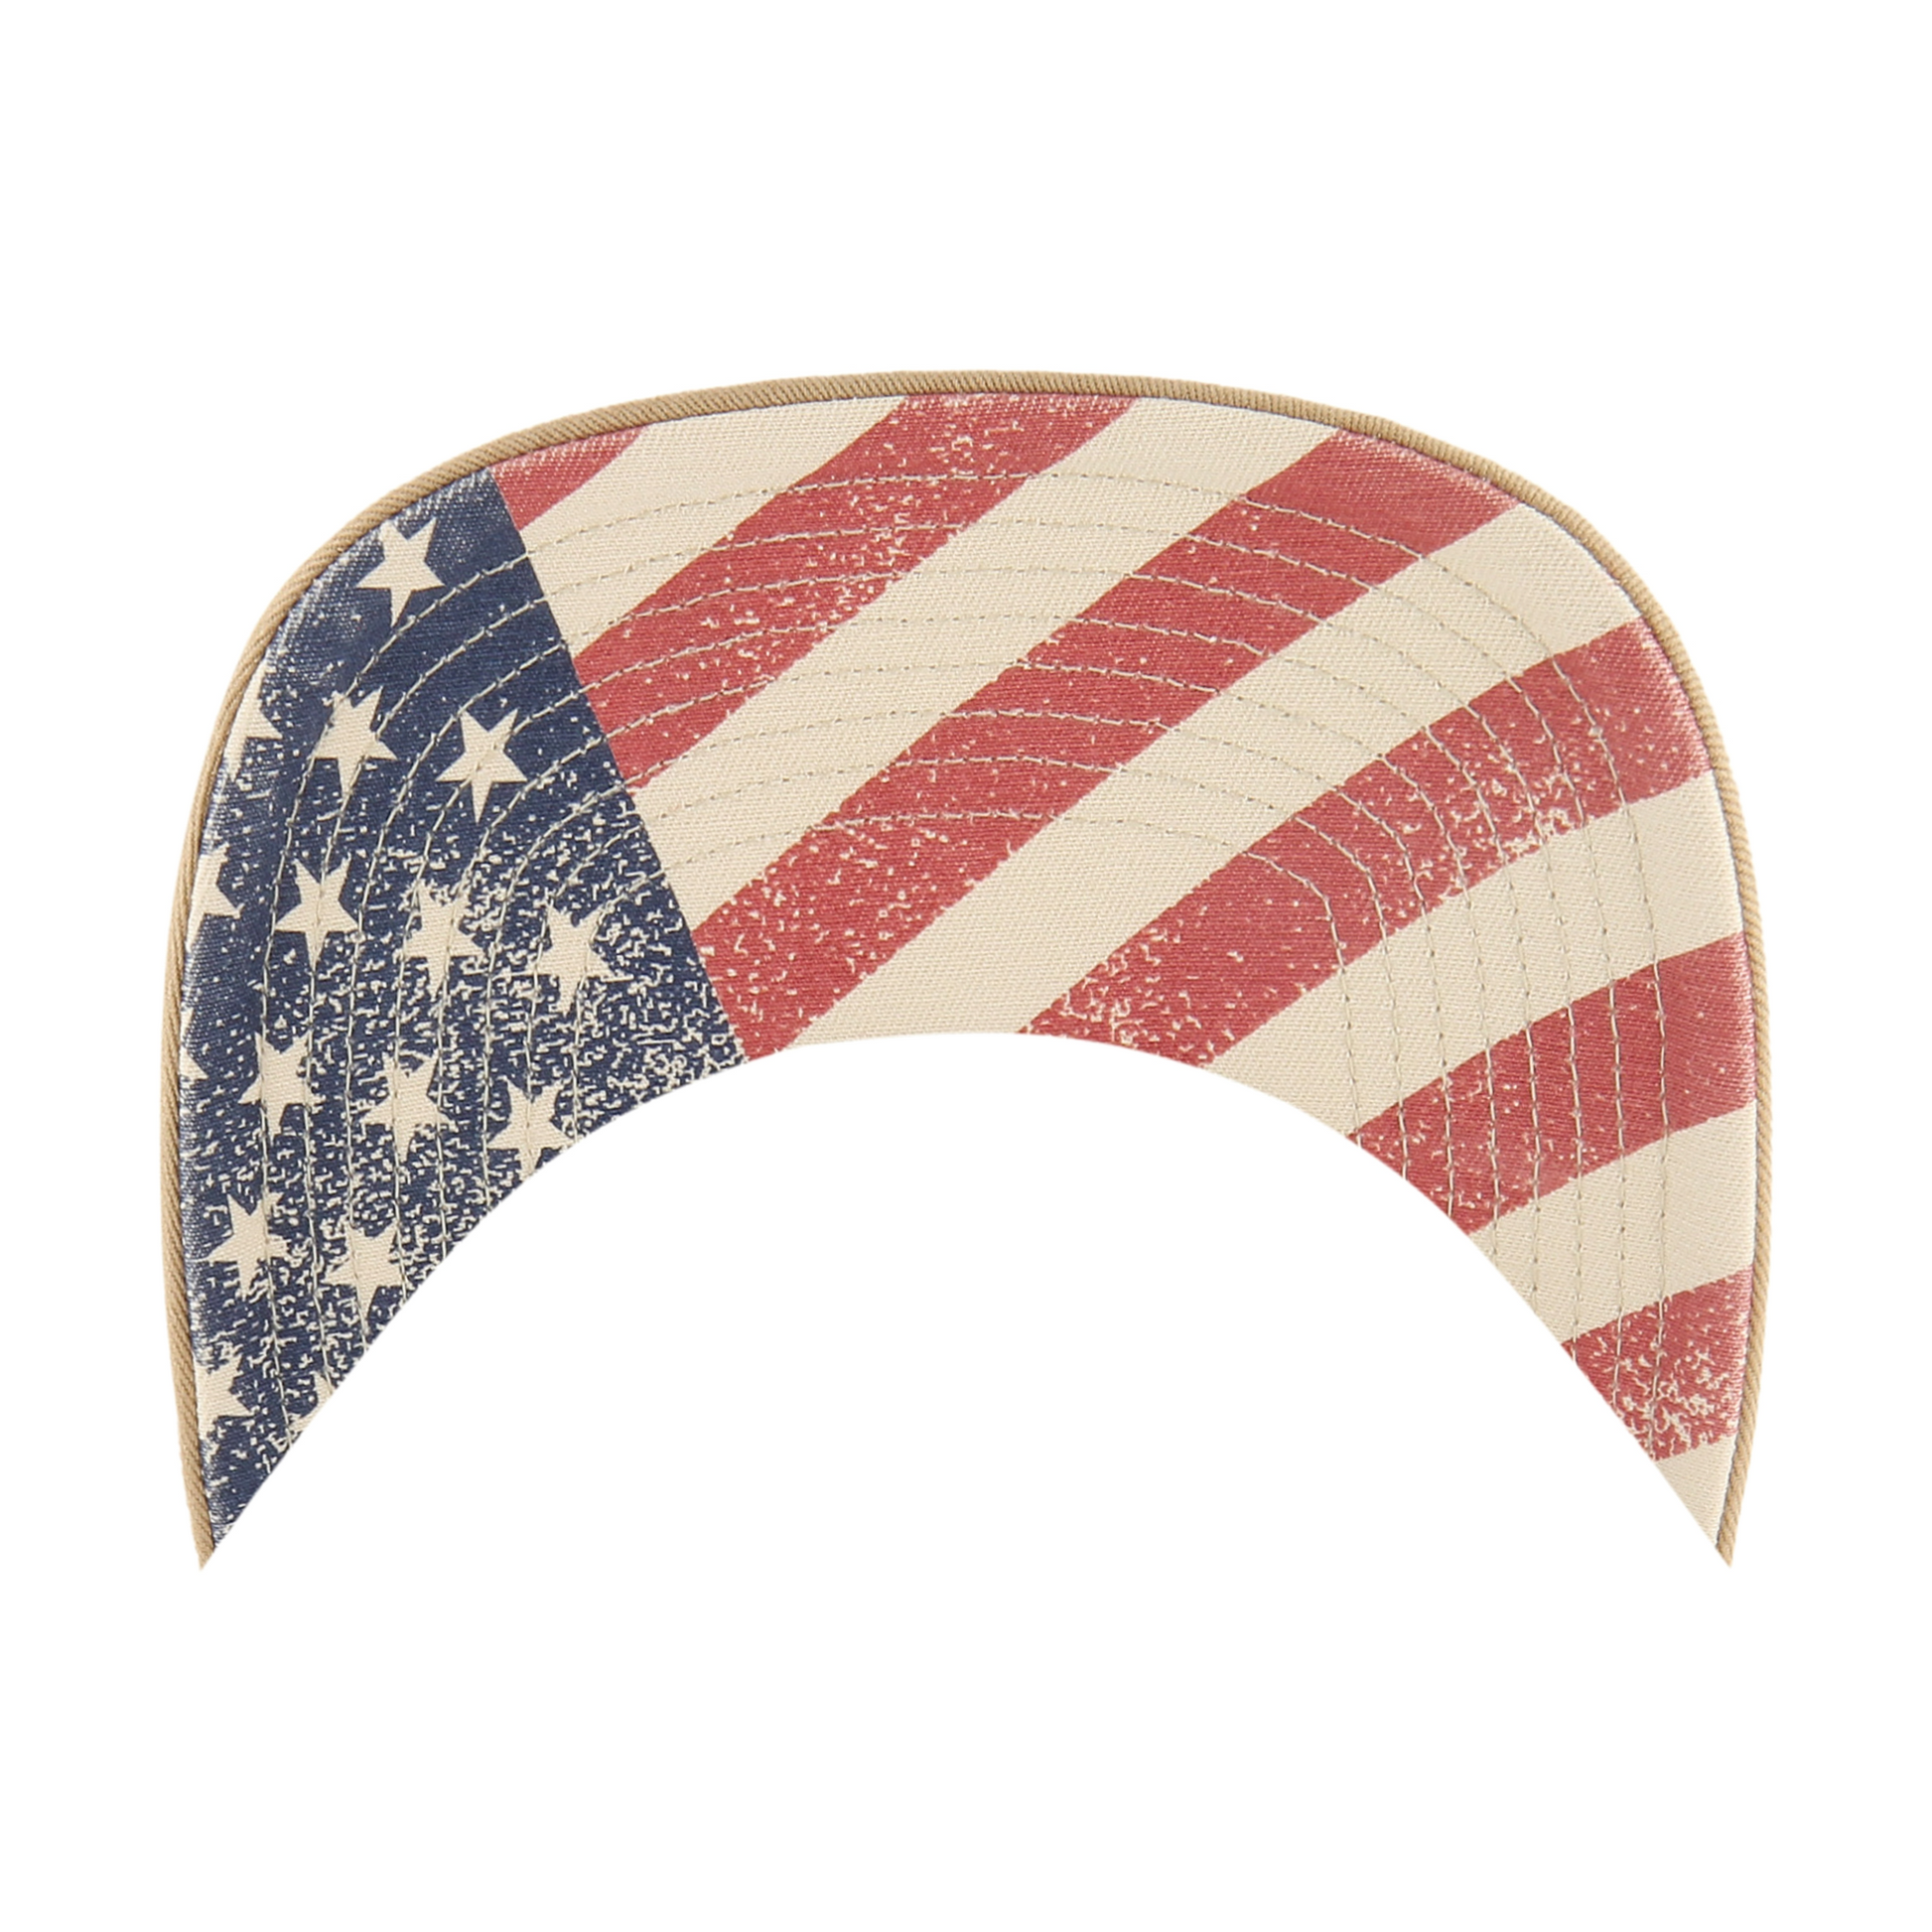 Under: Underbrim of cap tan with american flag graphic